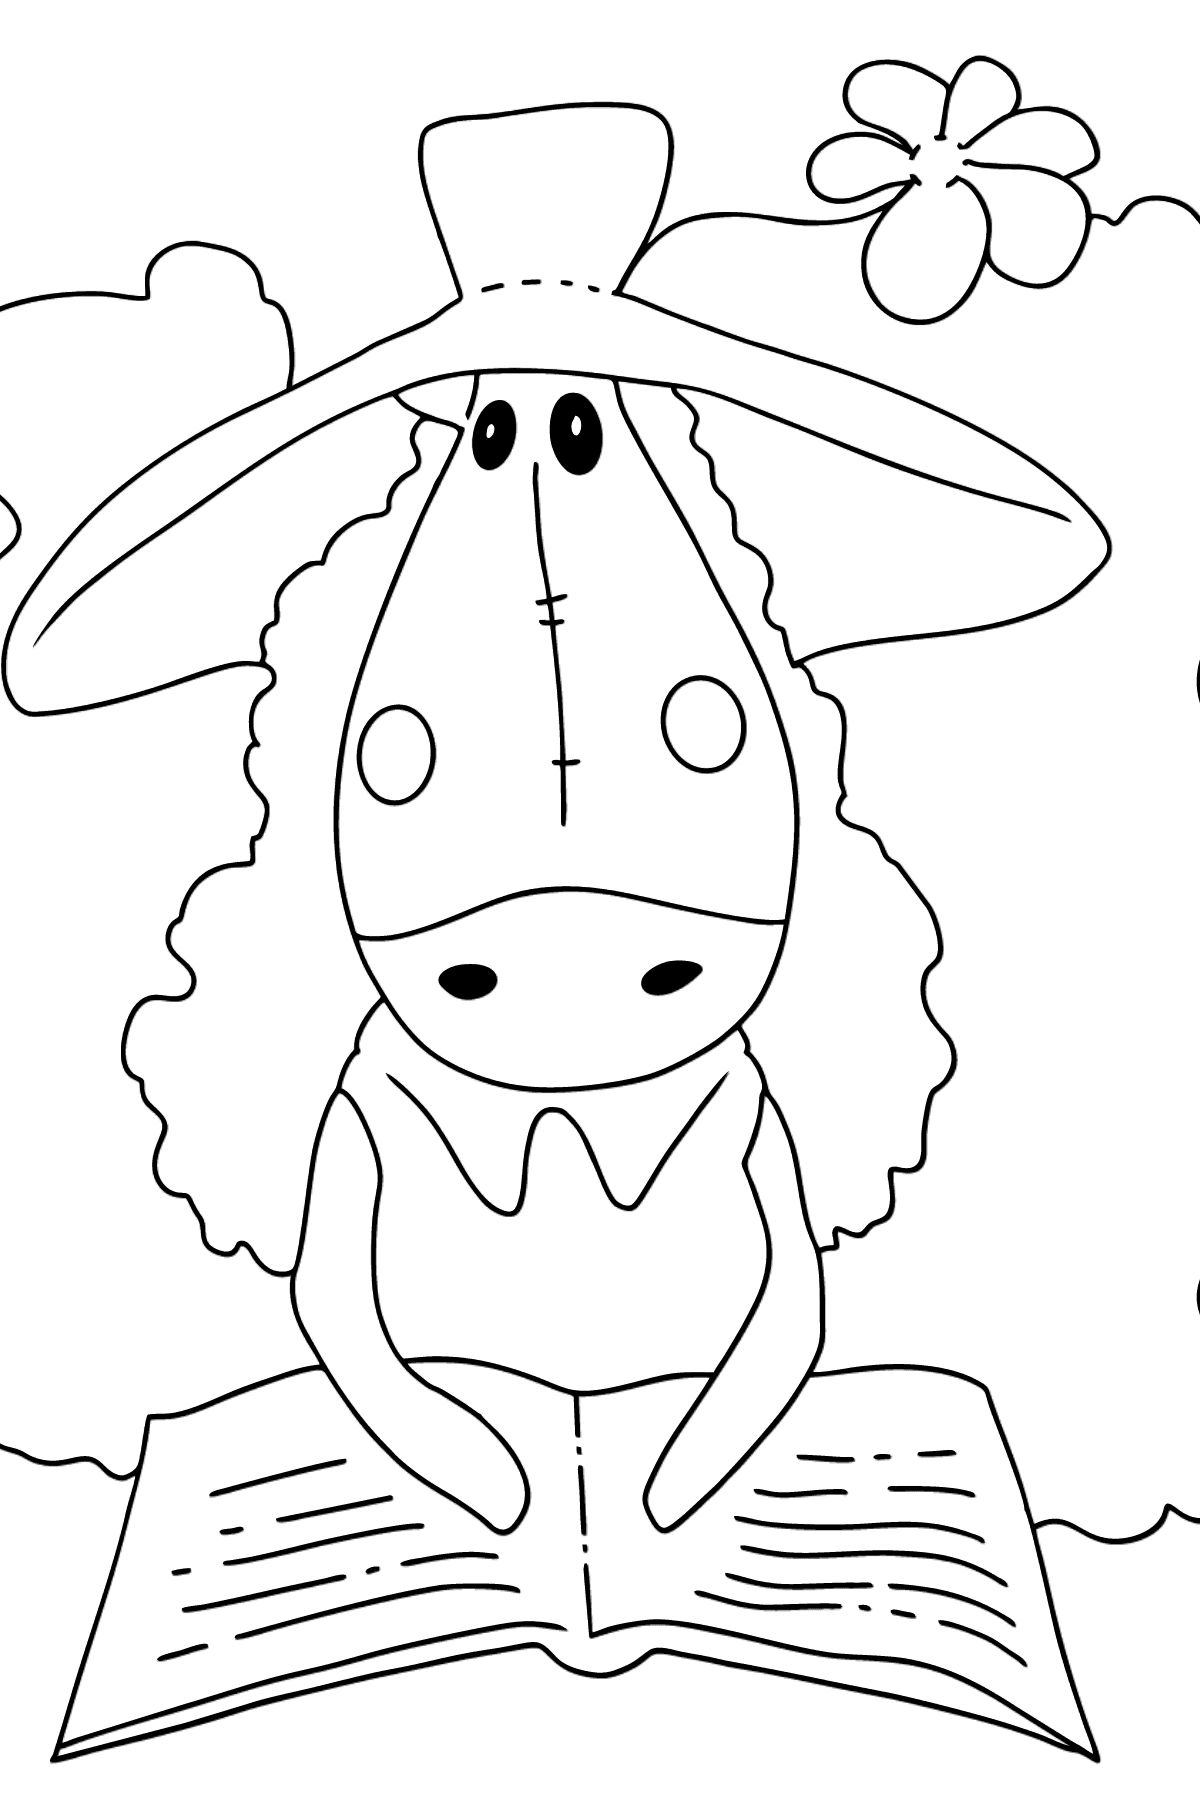 Simple coloring page a horse with book - Coloring Pages for Kids